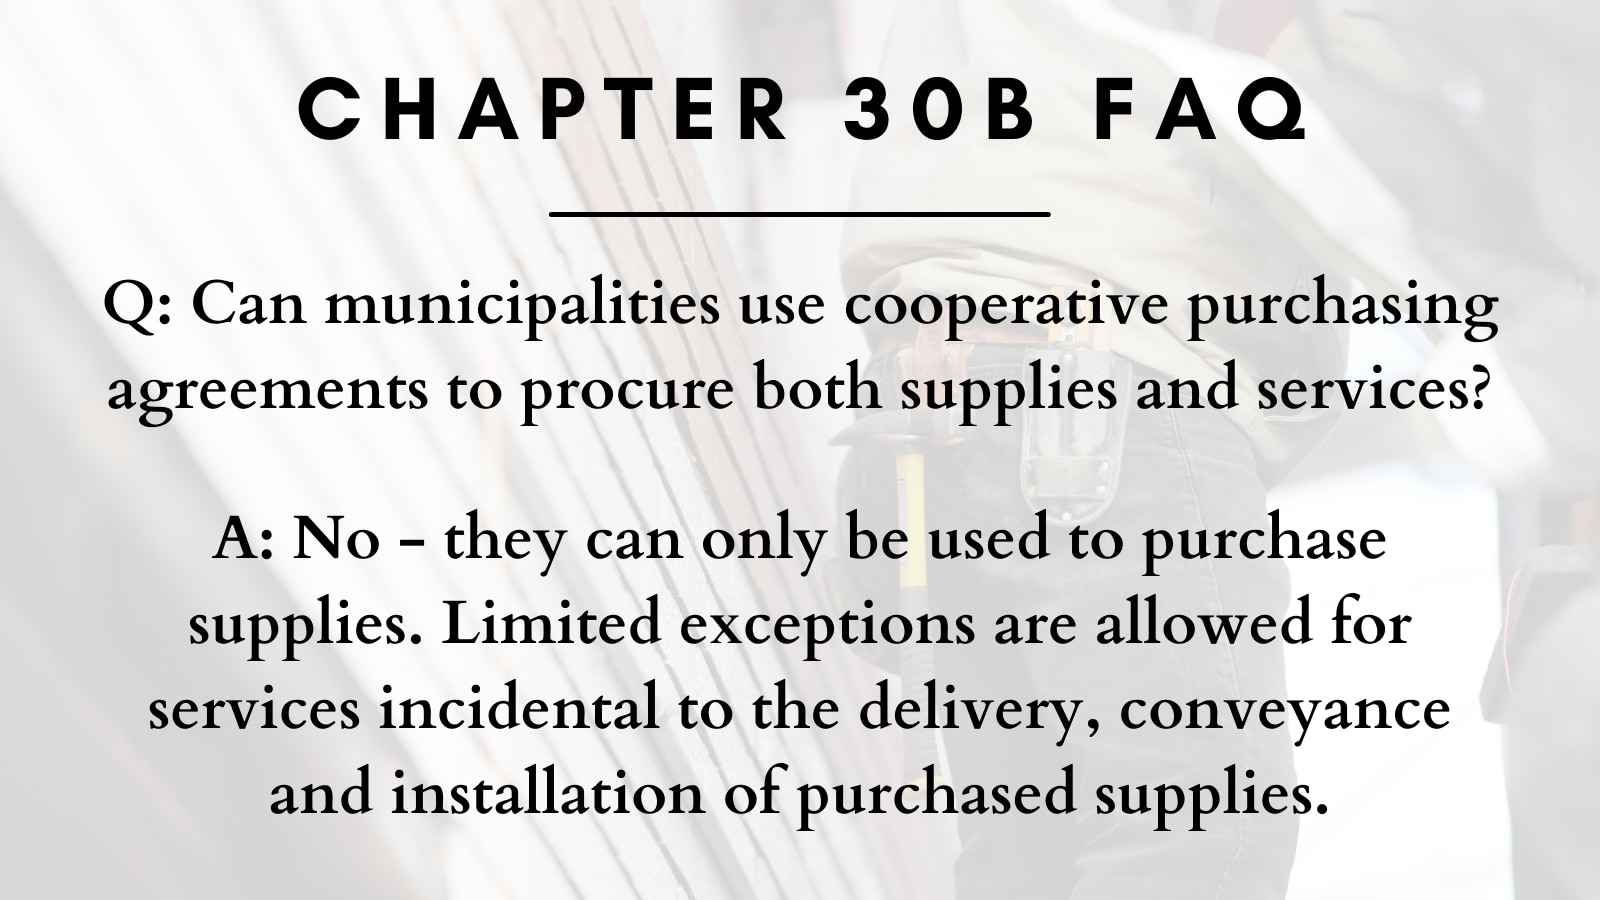 Chapter 30B FAQ about cooperative purchasing agreements for supplies and services